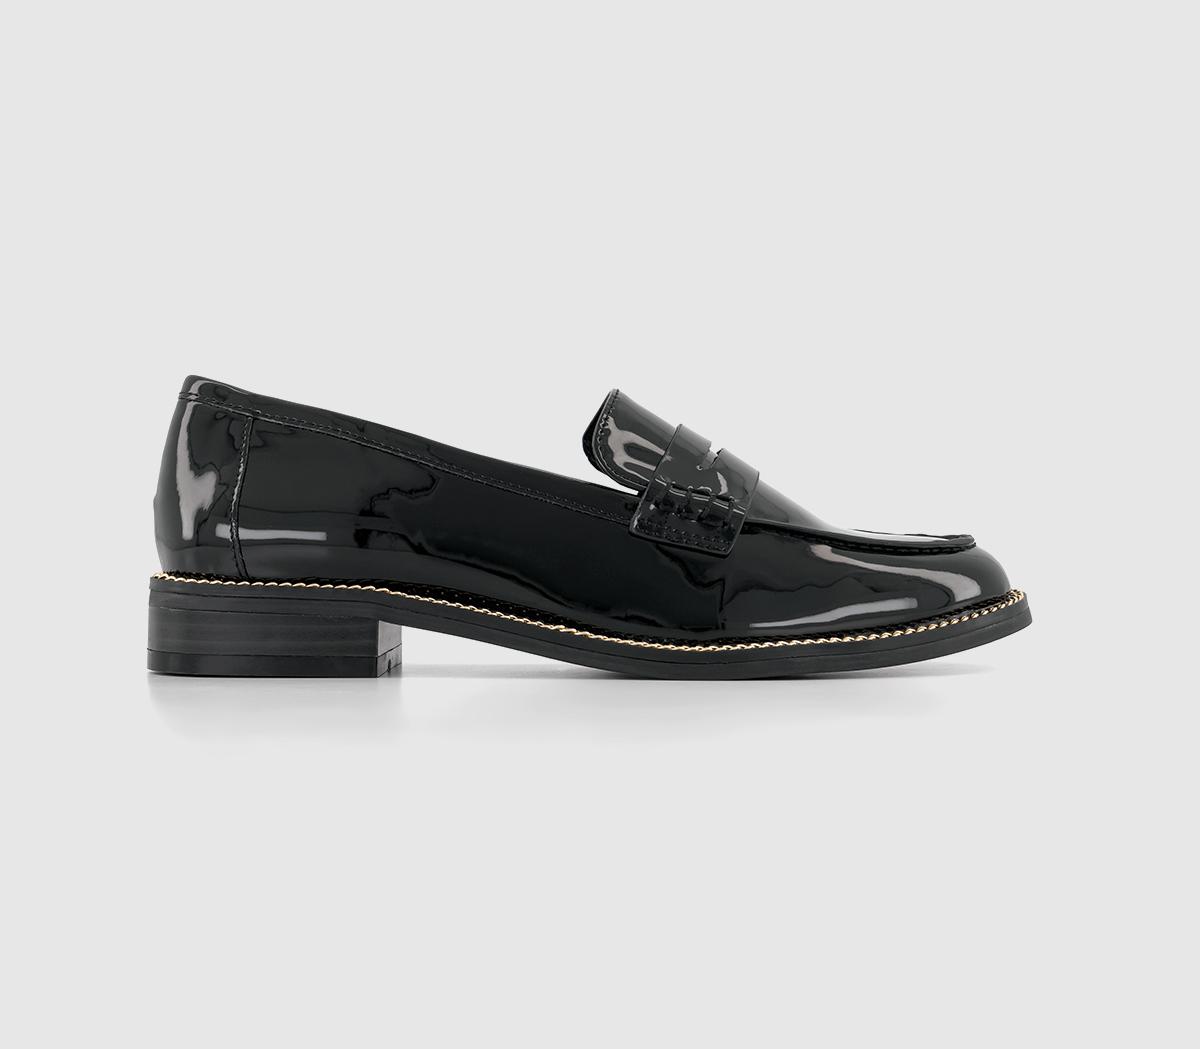 Fire Ball Chain Welt Loafers Black Patent